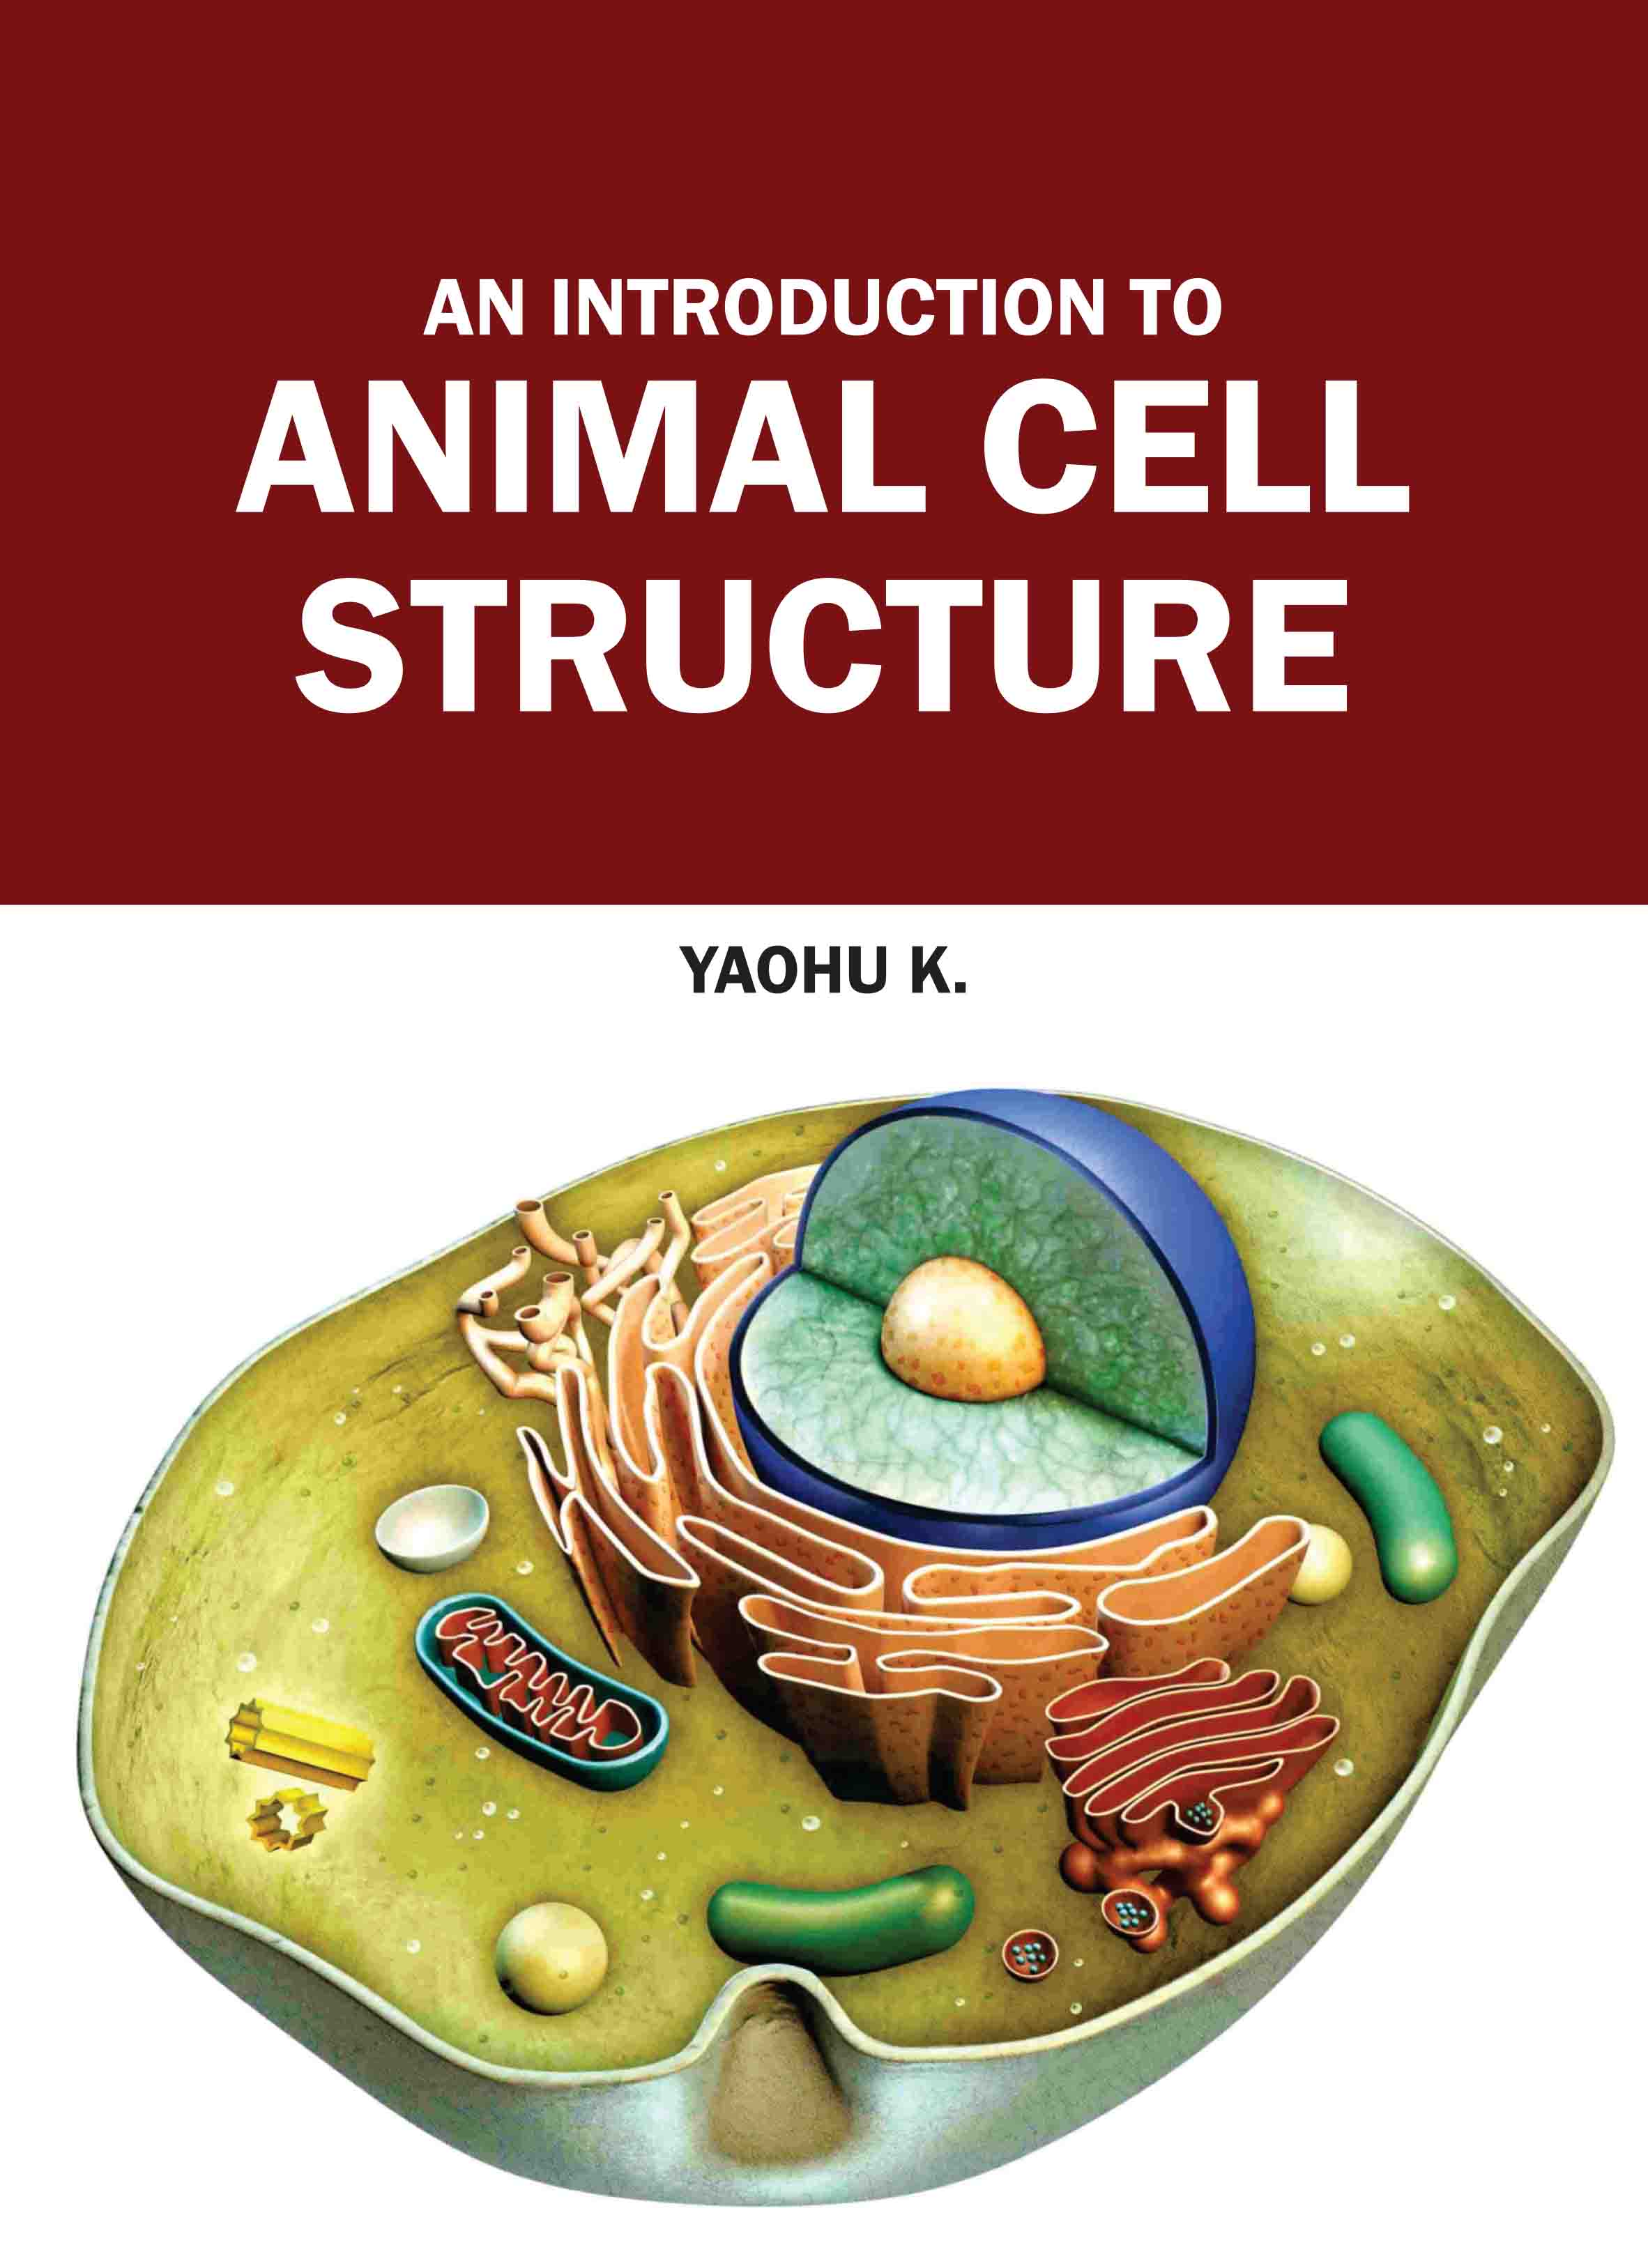 An Introduction to Animal Cell Structure